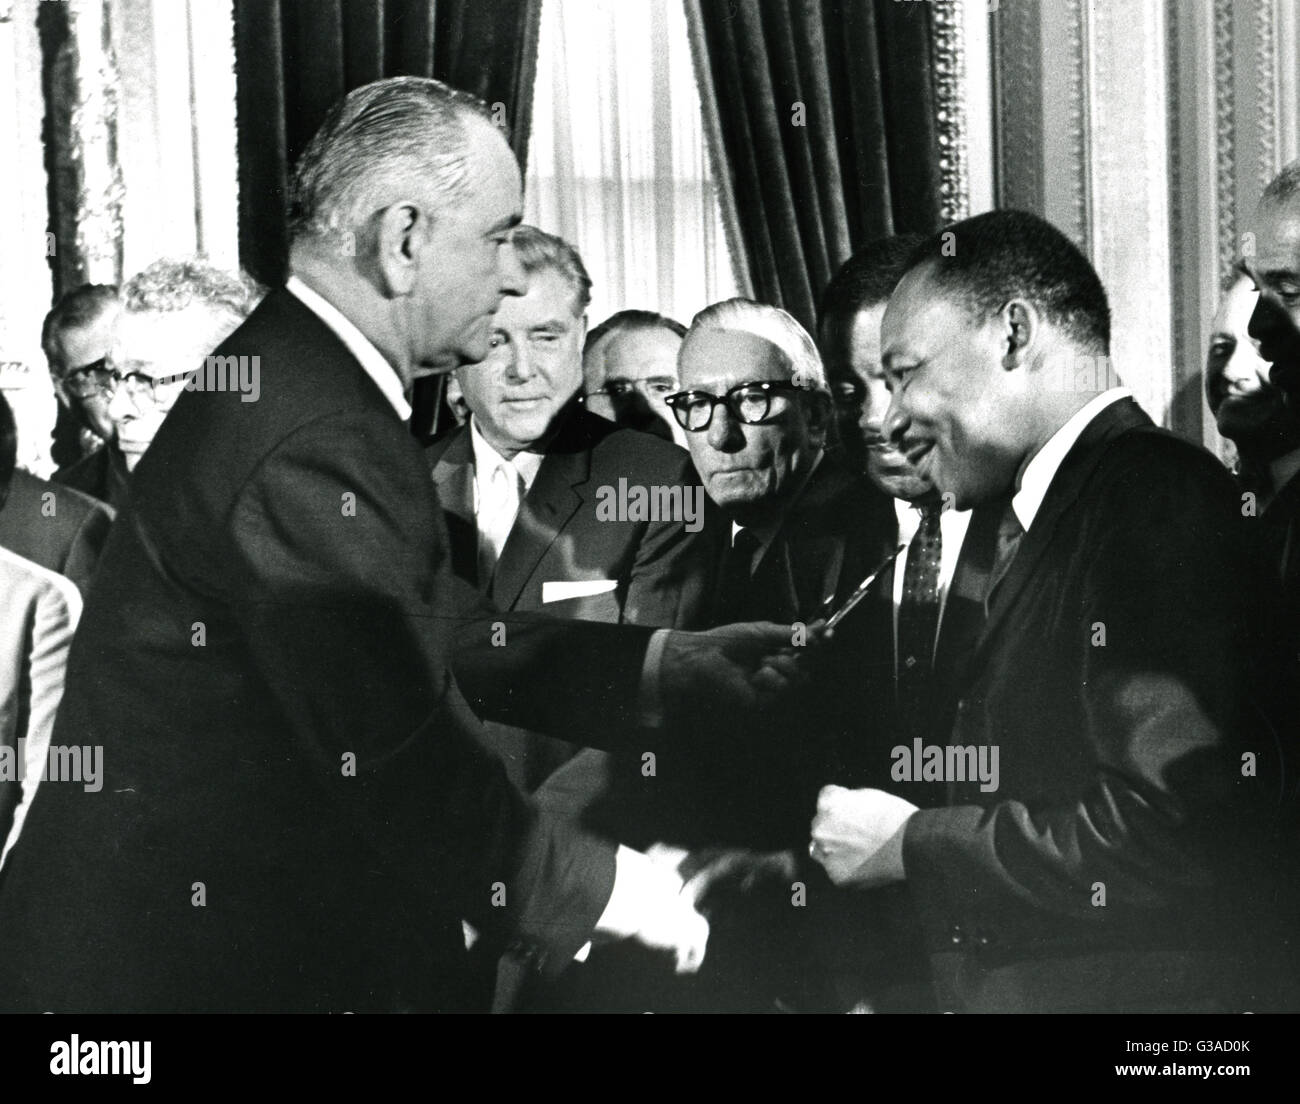 President Lyndon B. Johnson hands a souvenir pen to the Rev. Martin Luther King, Jr. after signing the Voting Rights Bill. The event took place at the Capitol. Stock Photo